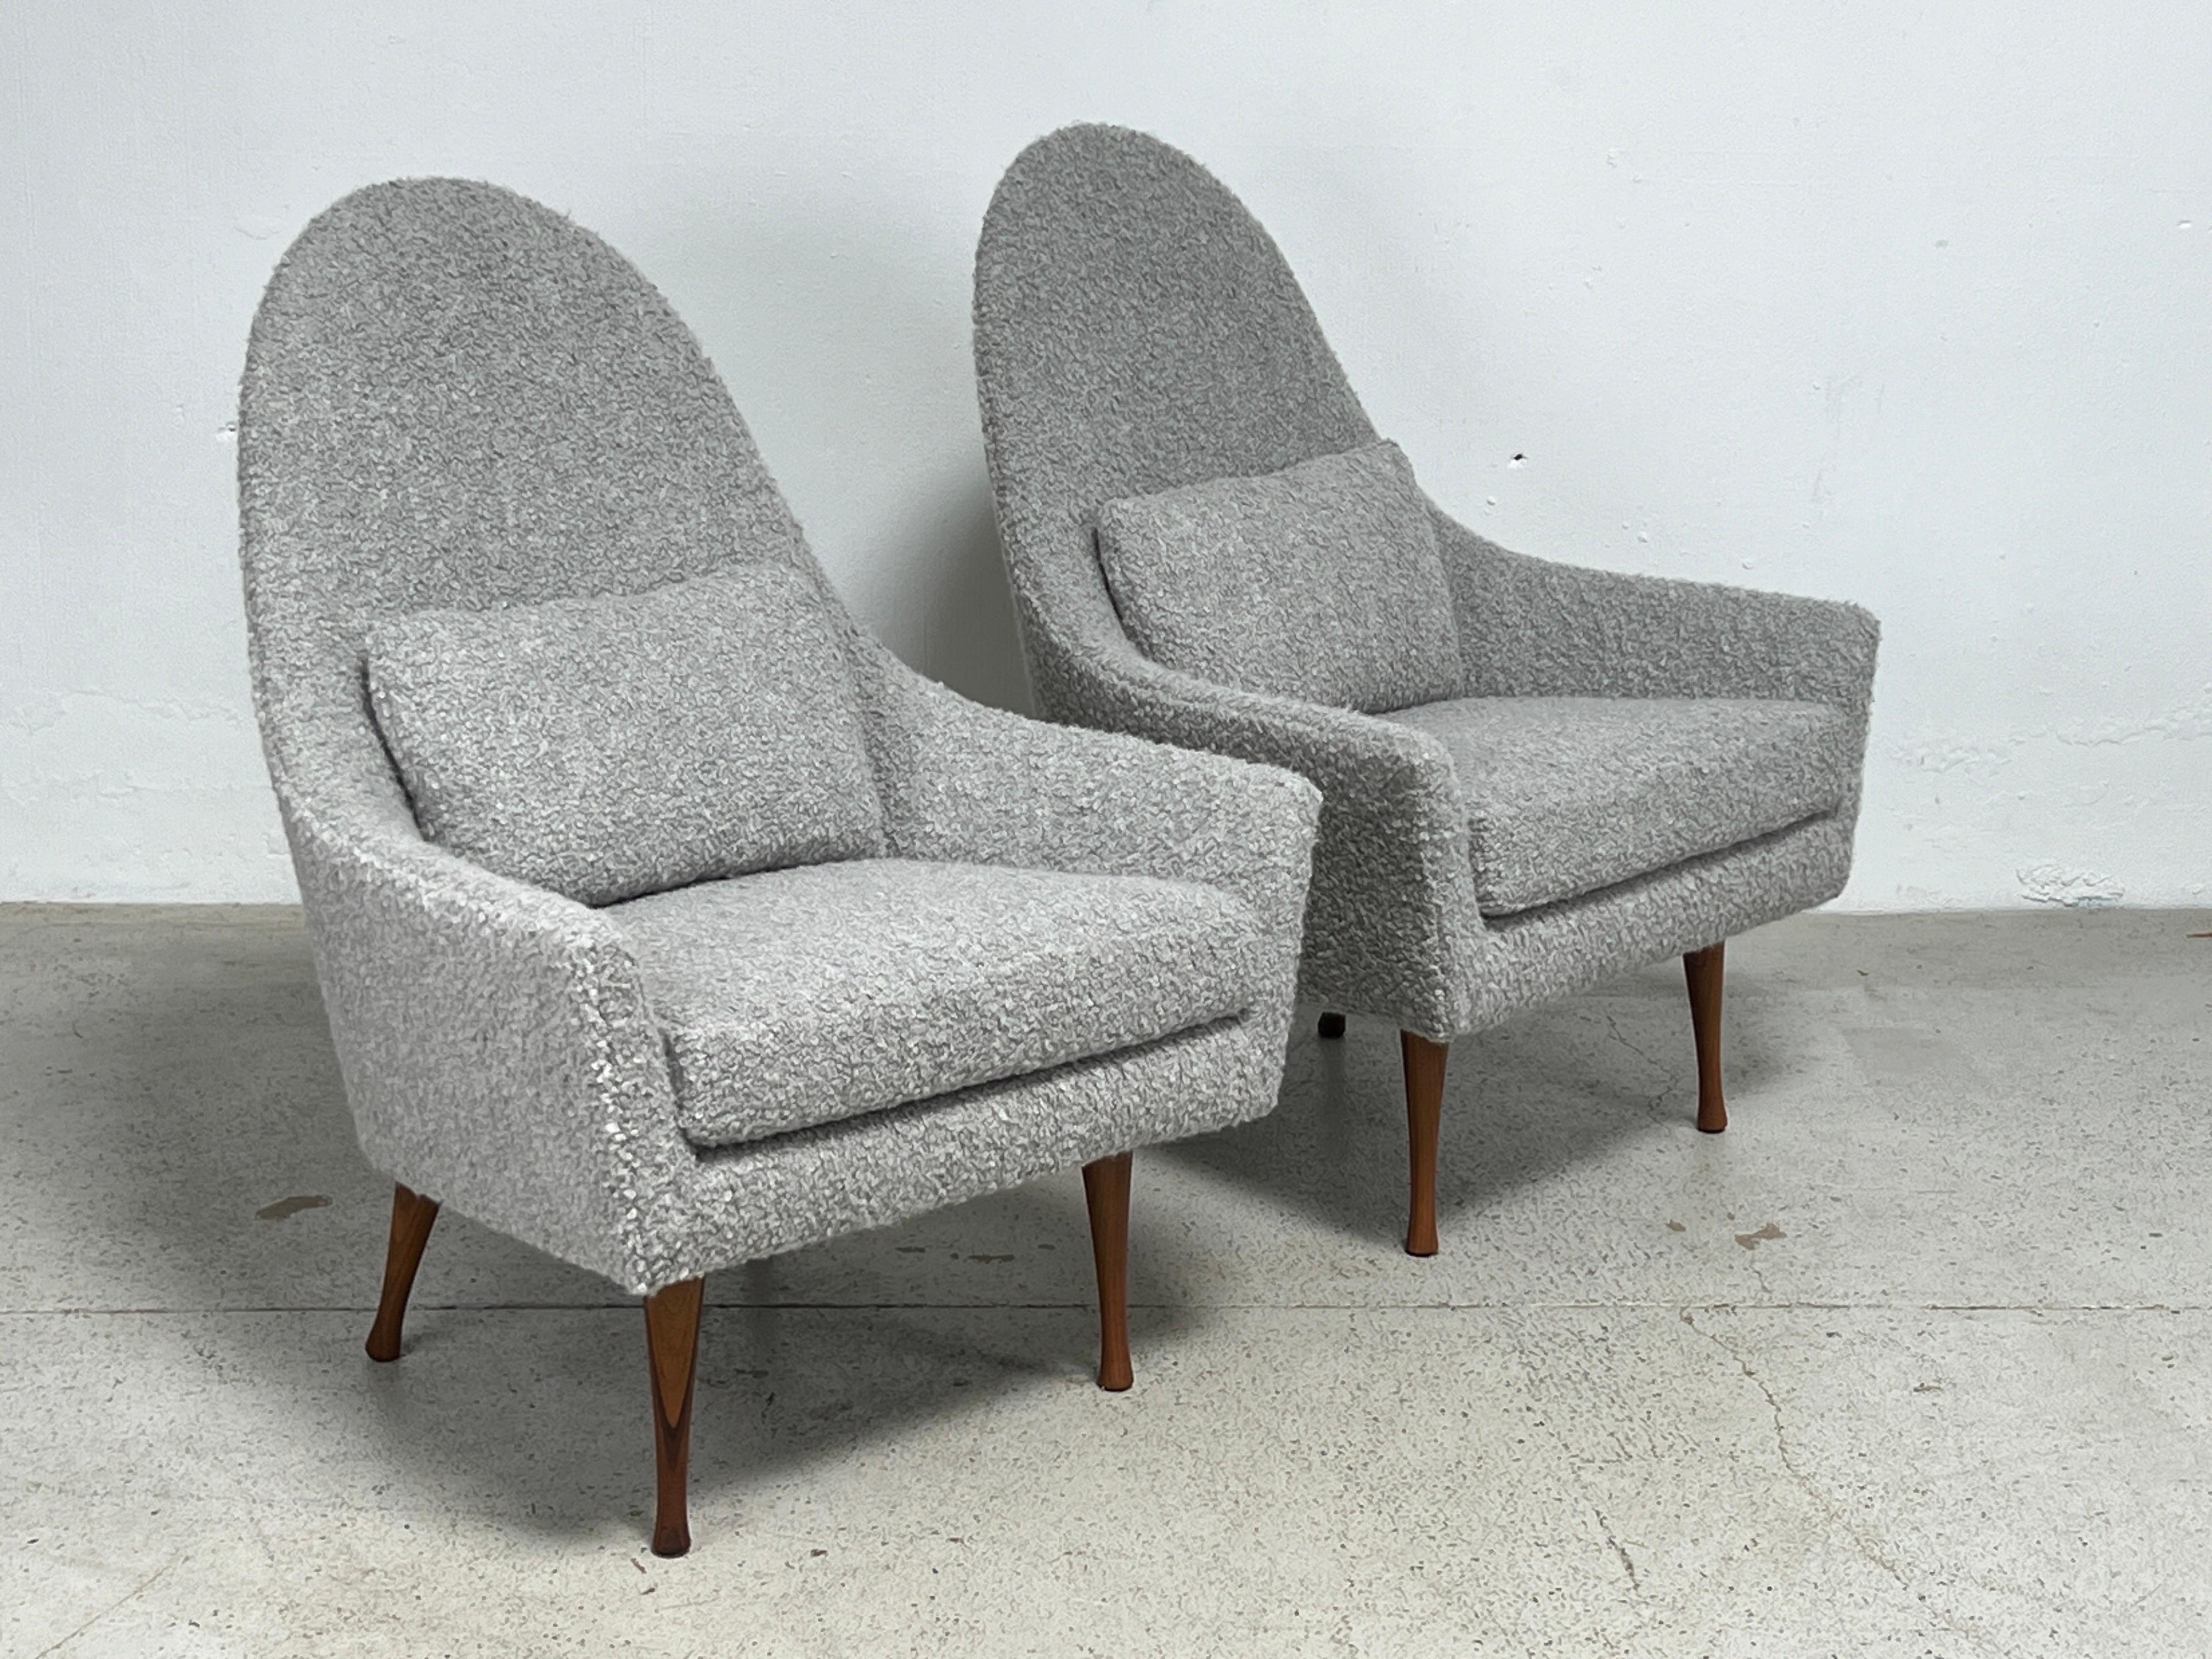 Pair of Lounge chairs by Paul McCobb for Widdicomb  For Sale 6